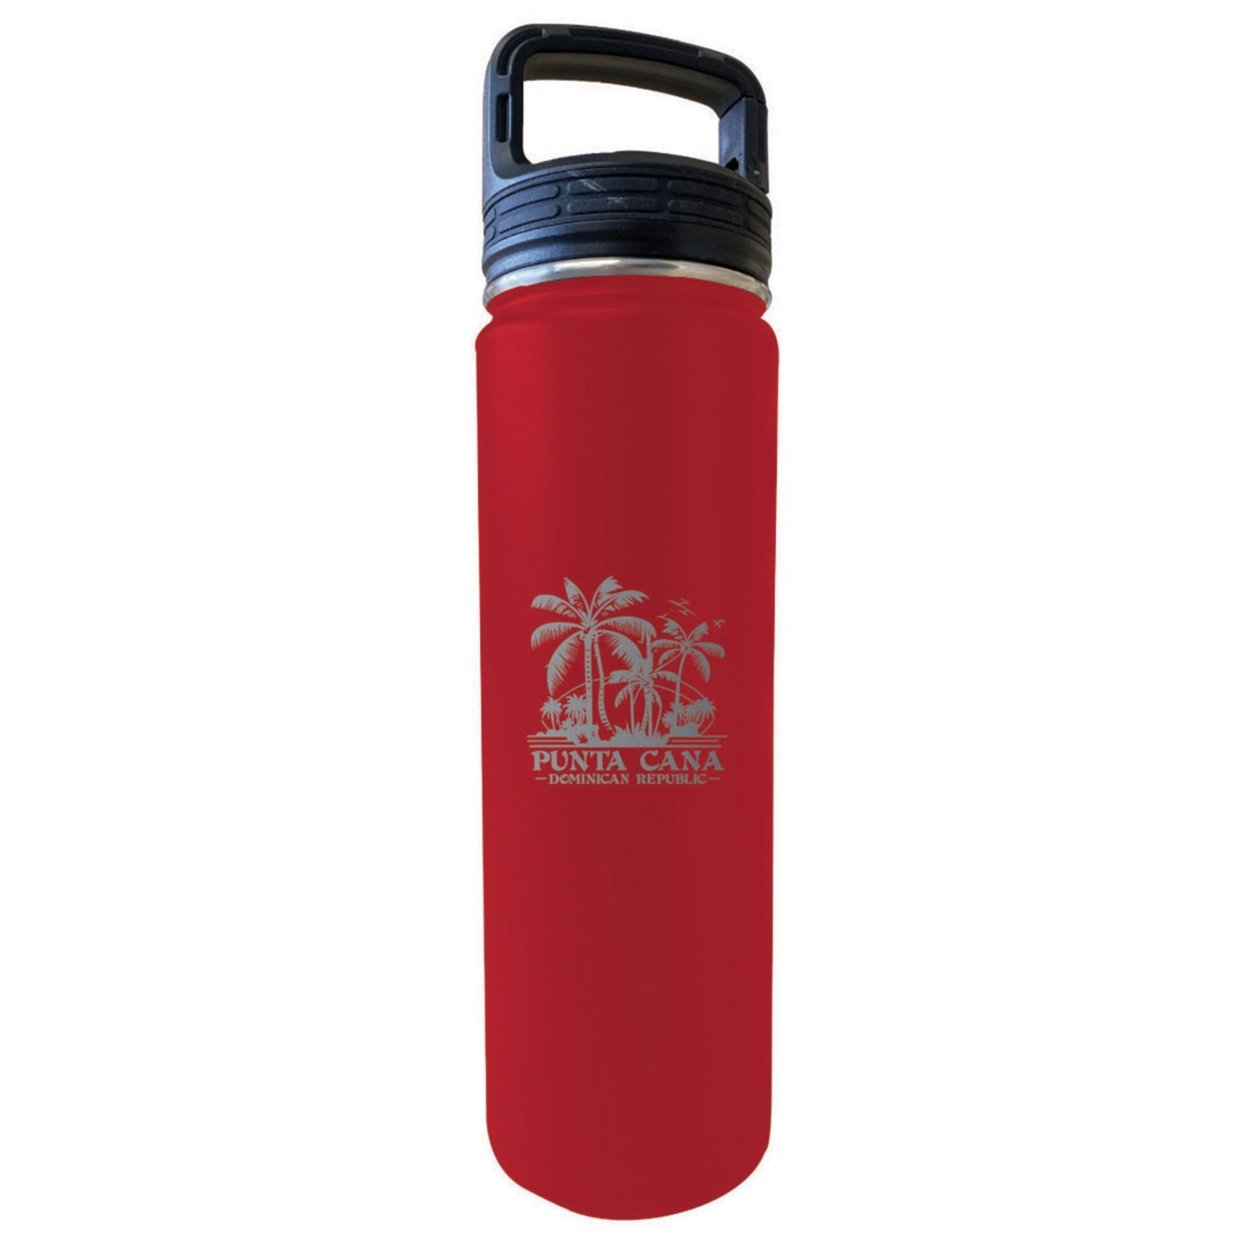 Punta Cana Dominican Republic Souvenir 32 Oz Insulated Stainless Steel Tumbler - Navy, Parrot